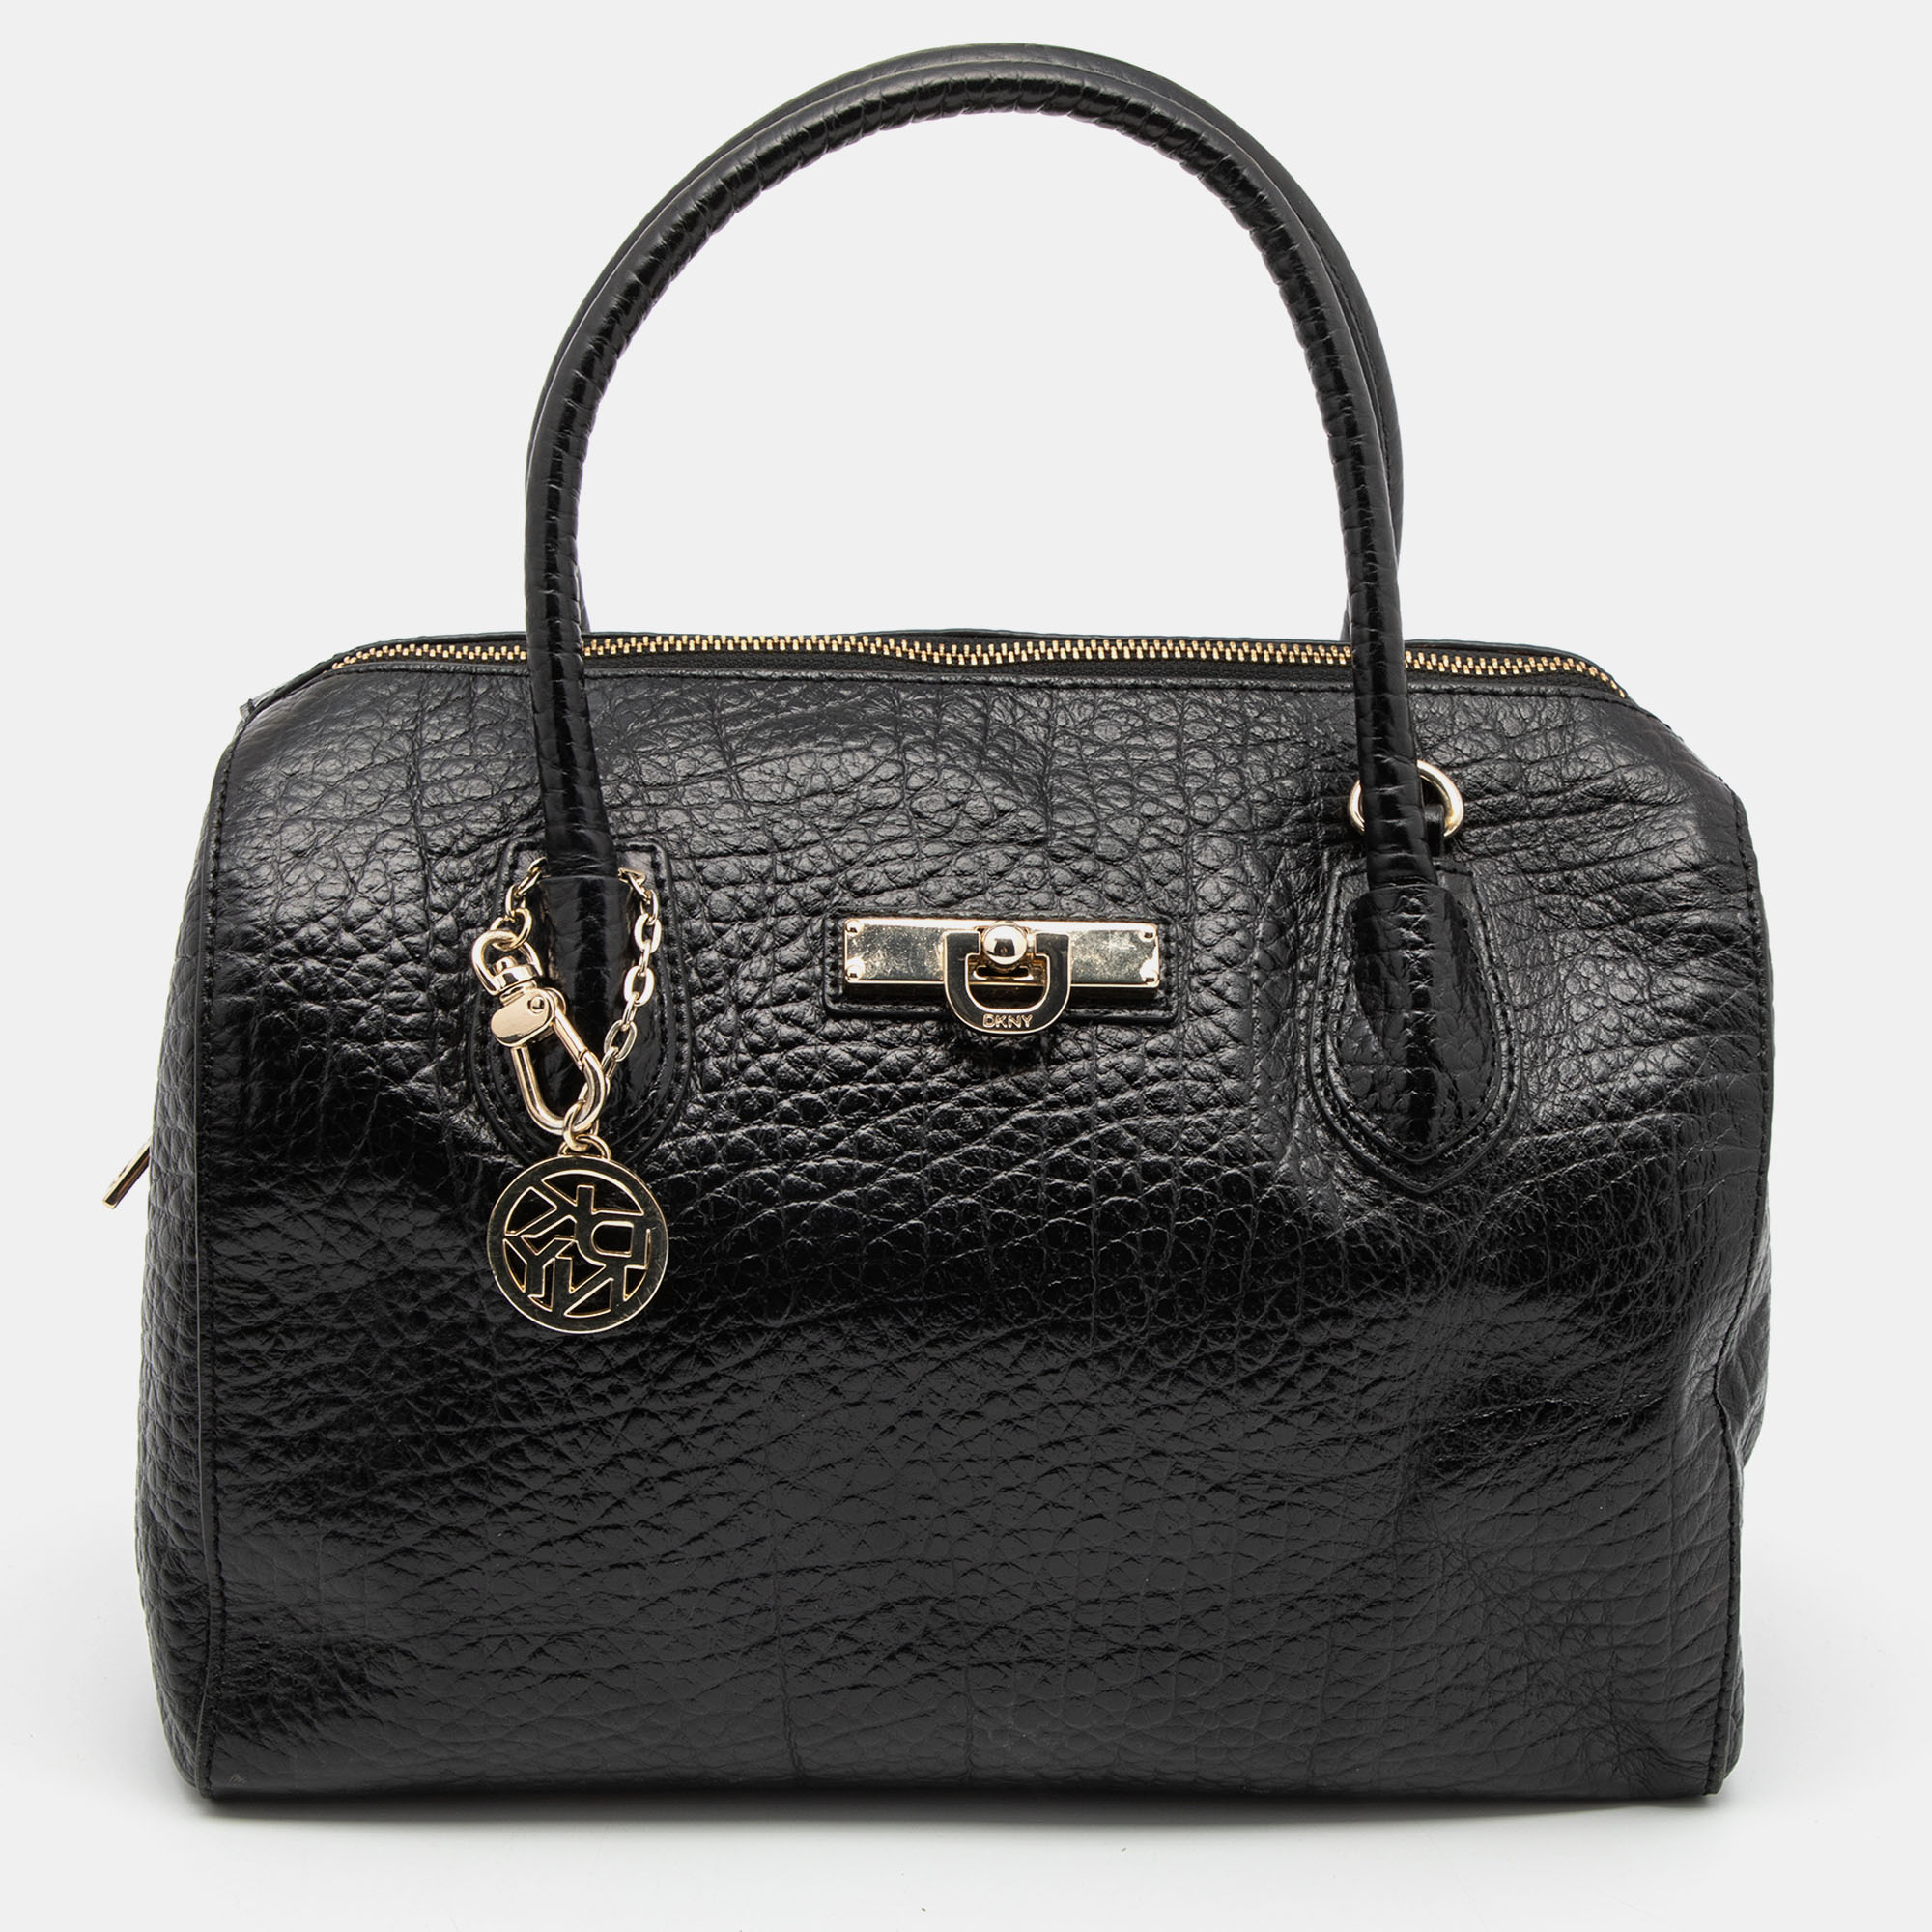 Pre-owned Dkny Black Grained Leather Satchel